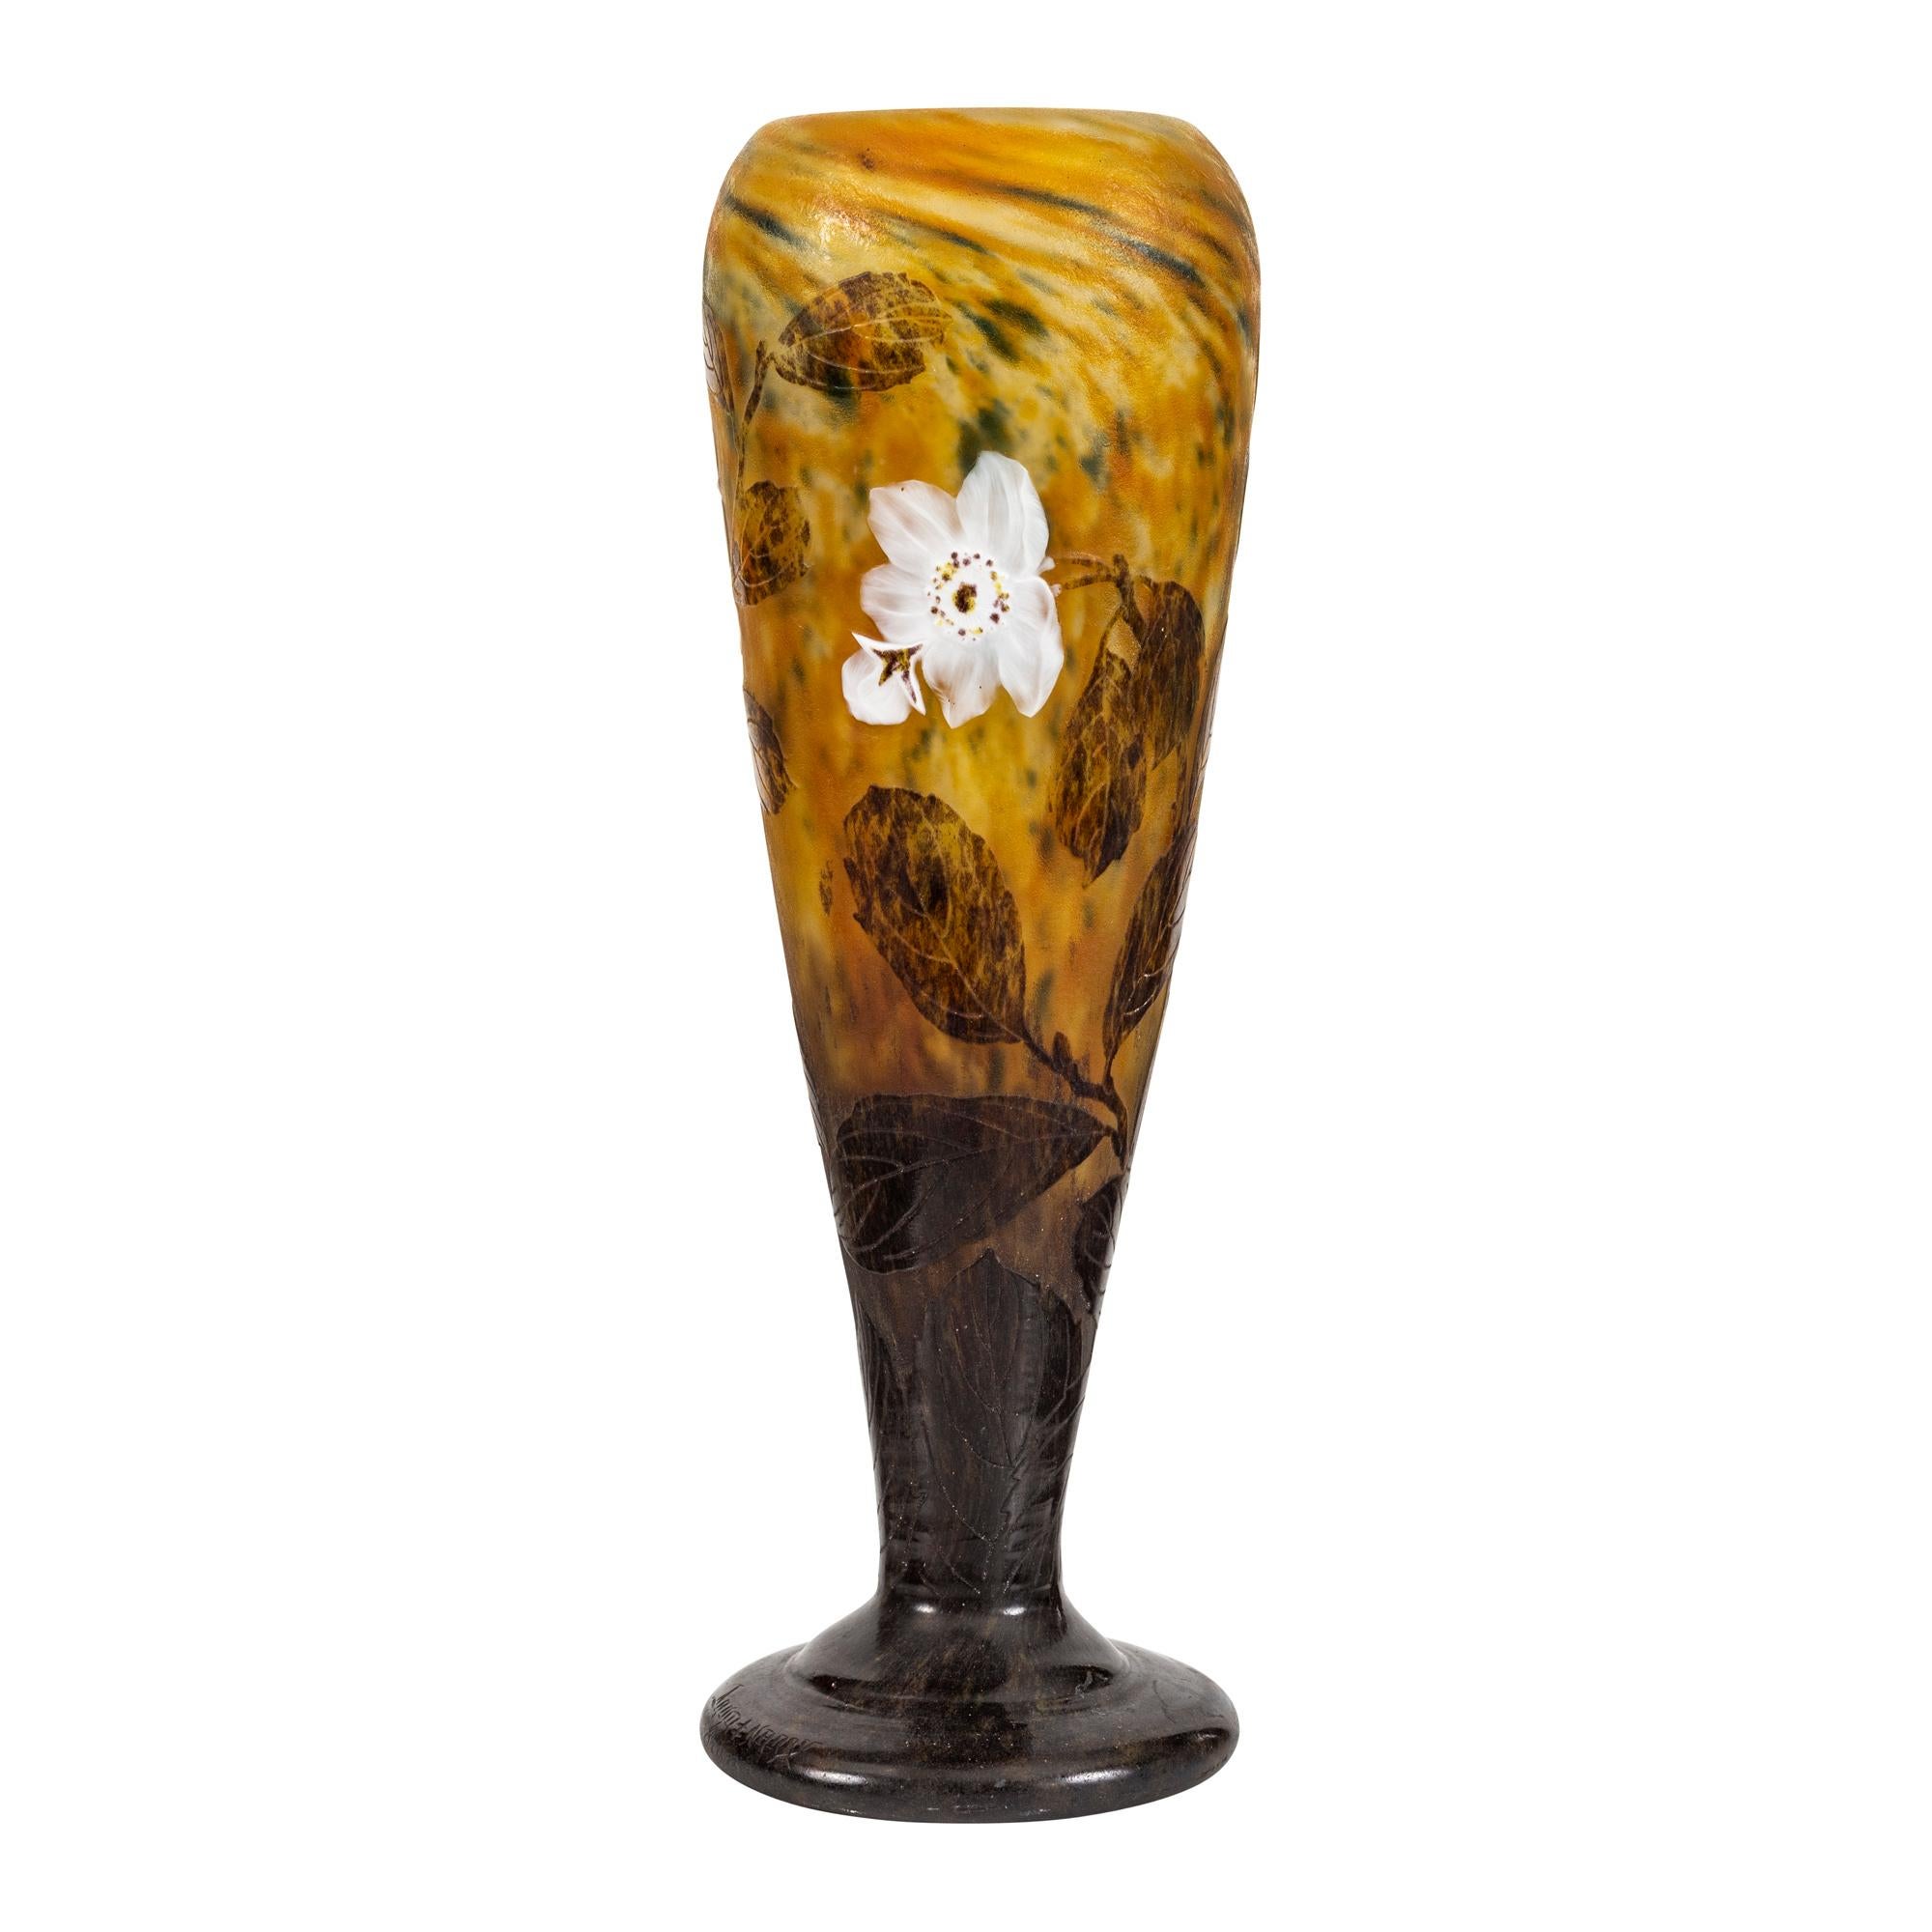 A fine Daum Nancy cameo and enamel glass vase
France, circa 1914
of triangular tapered form decorated with applied white flowers, green leaves and flowering pods on a mottled green and yellow ground ending on a circular foot
cameo mark Daum Nancy